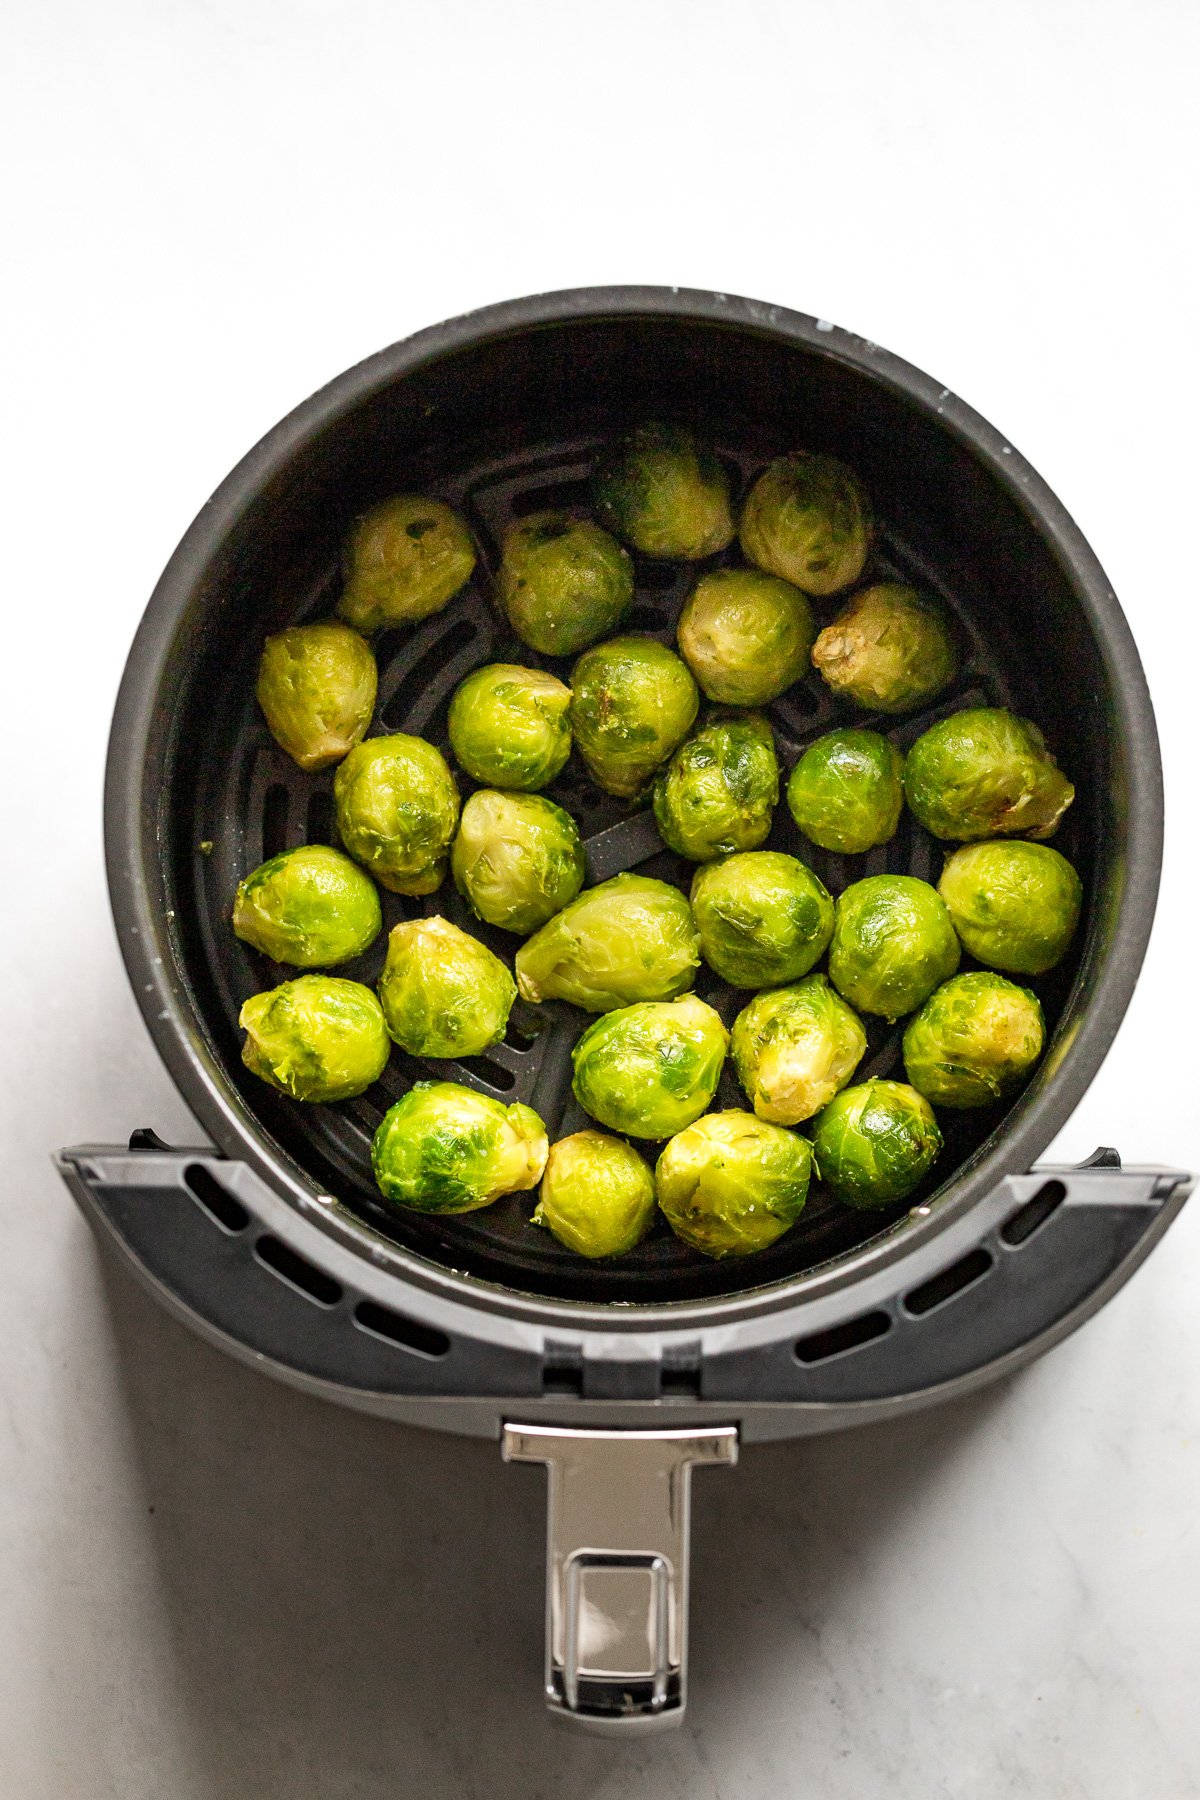 Brussels sprouts in air fryer halfway through cooking.